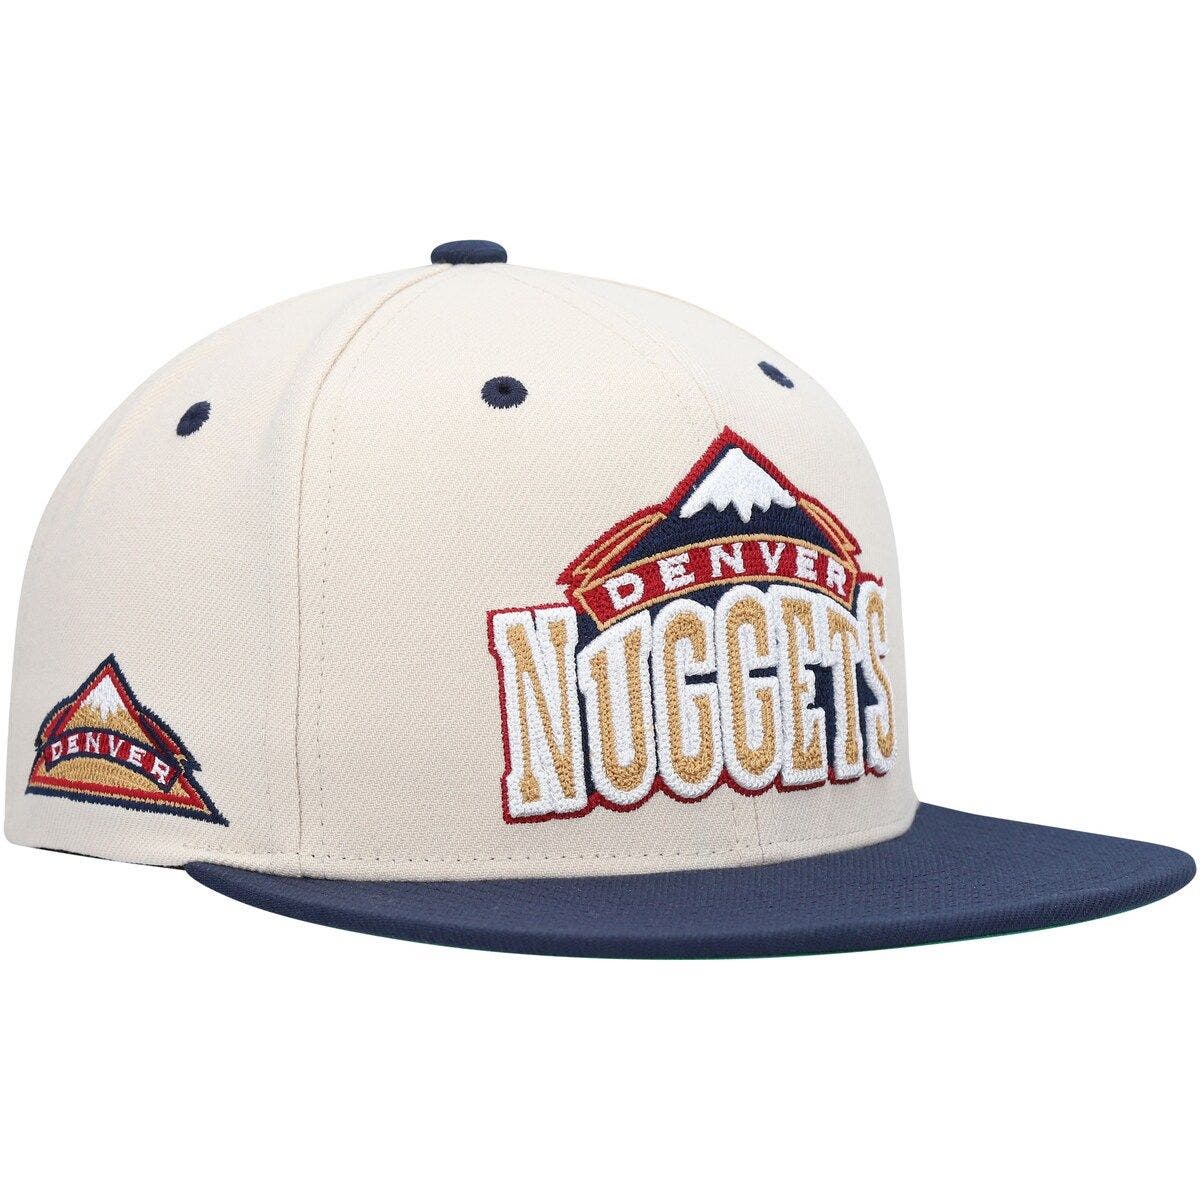 Men's New Orleans Pelicans Mitchell & Ness White/Navy Heritage Script Snapback  Hat